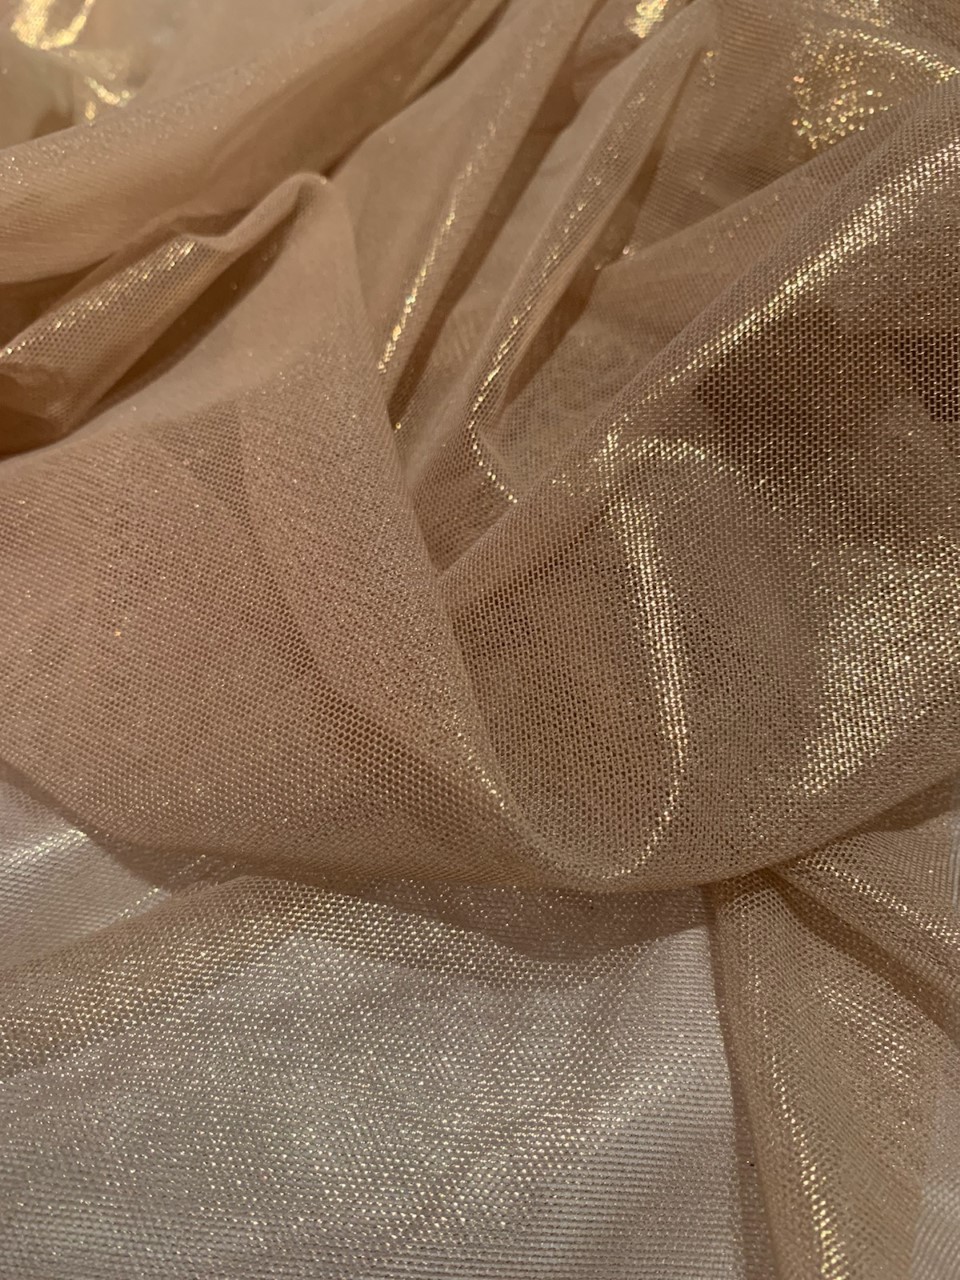 57" Nude/Gold Foil Power Mesh Fabric By The Yard